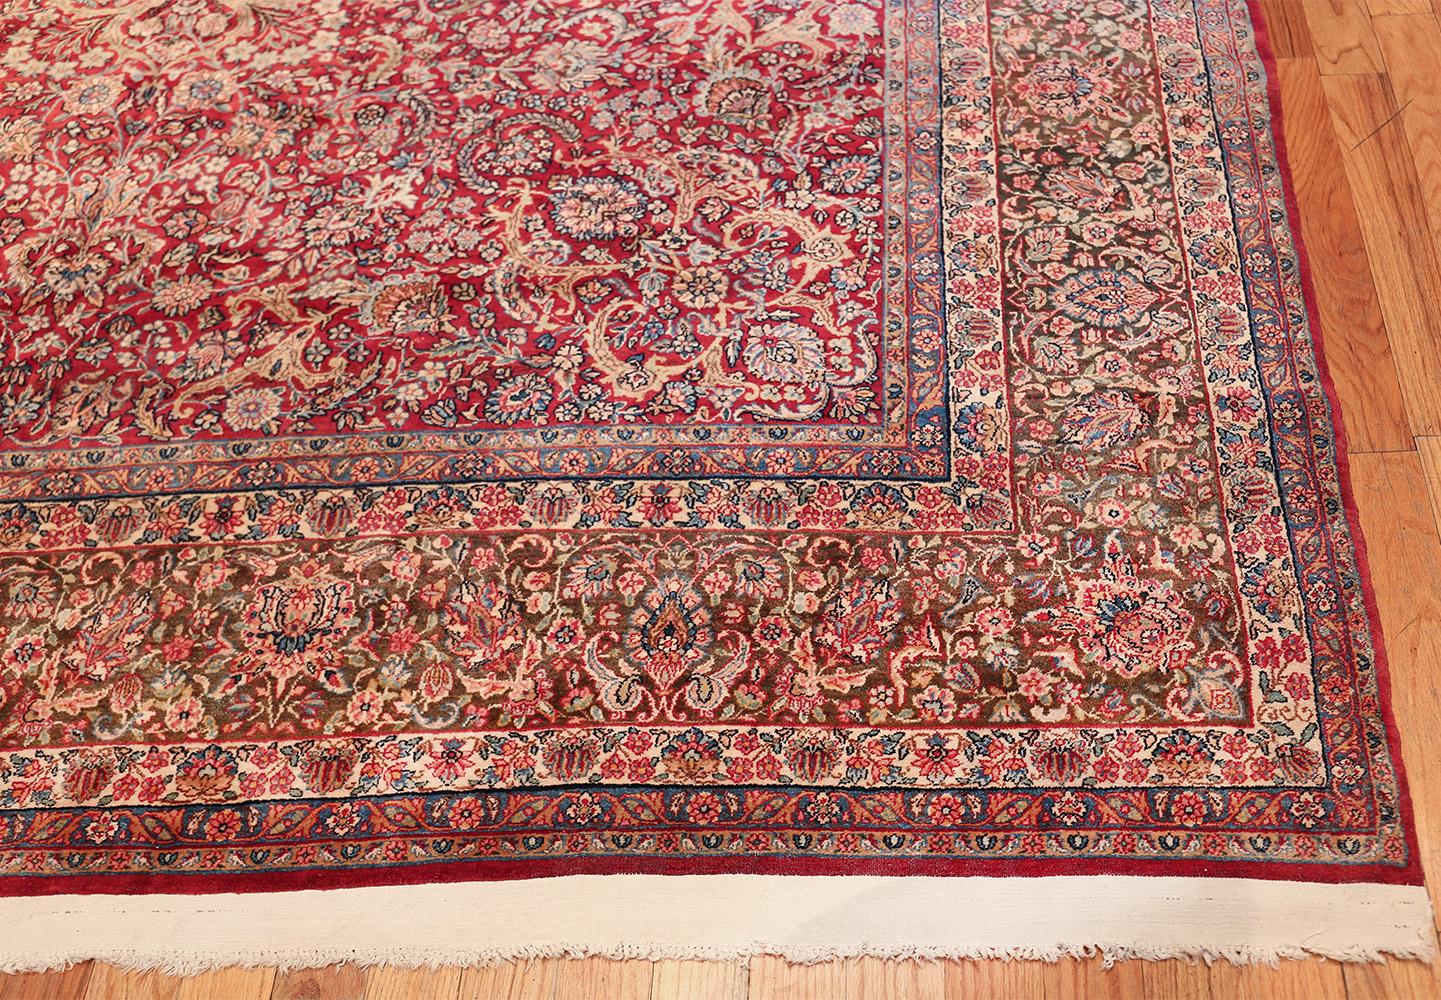 Antique Kerman Persian Rug. Size: 9 ft 9 in x 17 ft 3 in (2.97 m x 5.26 m) 1